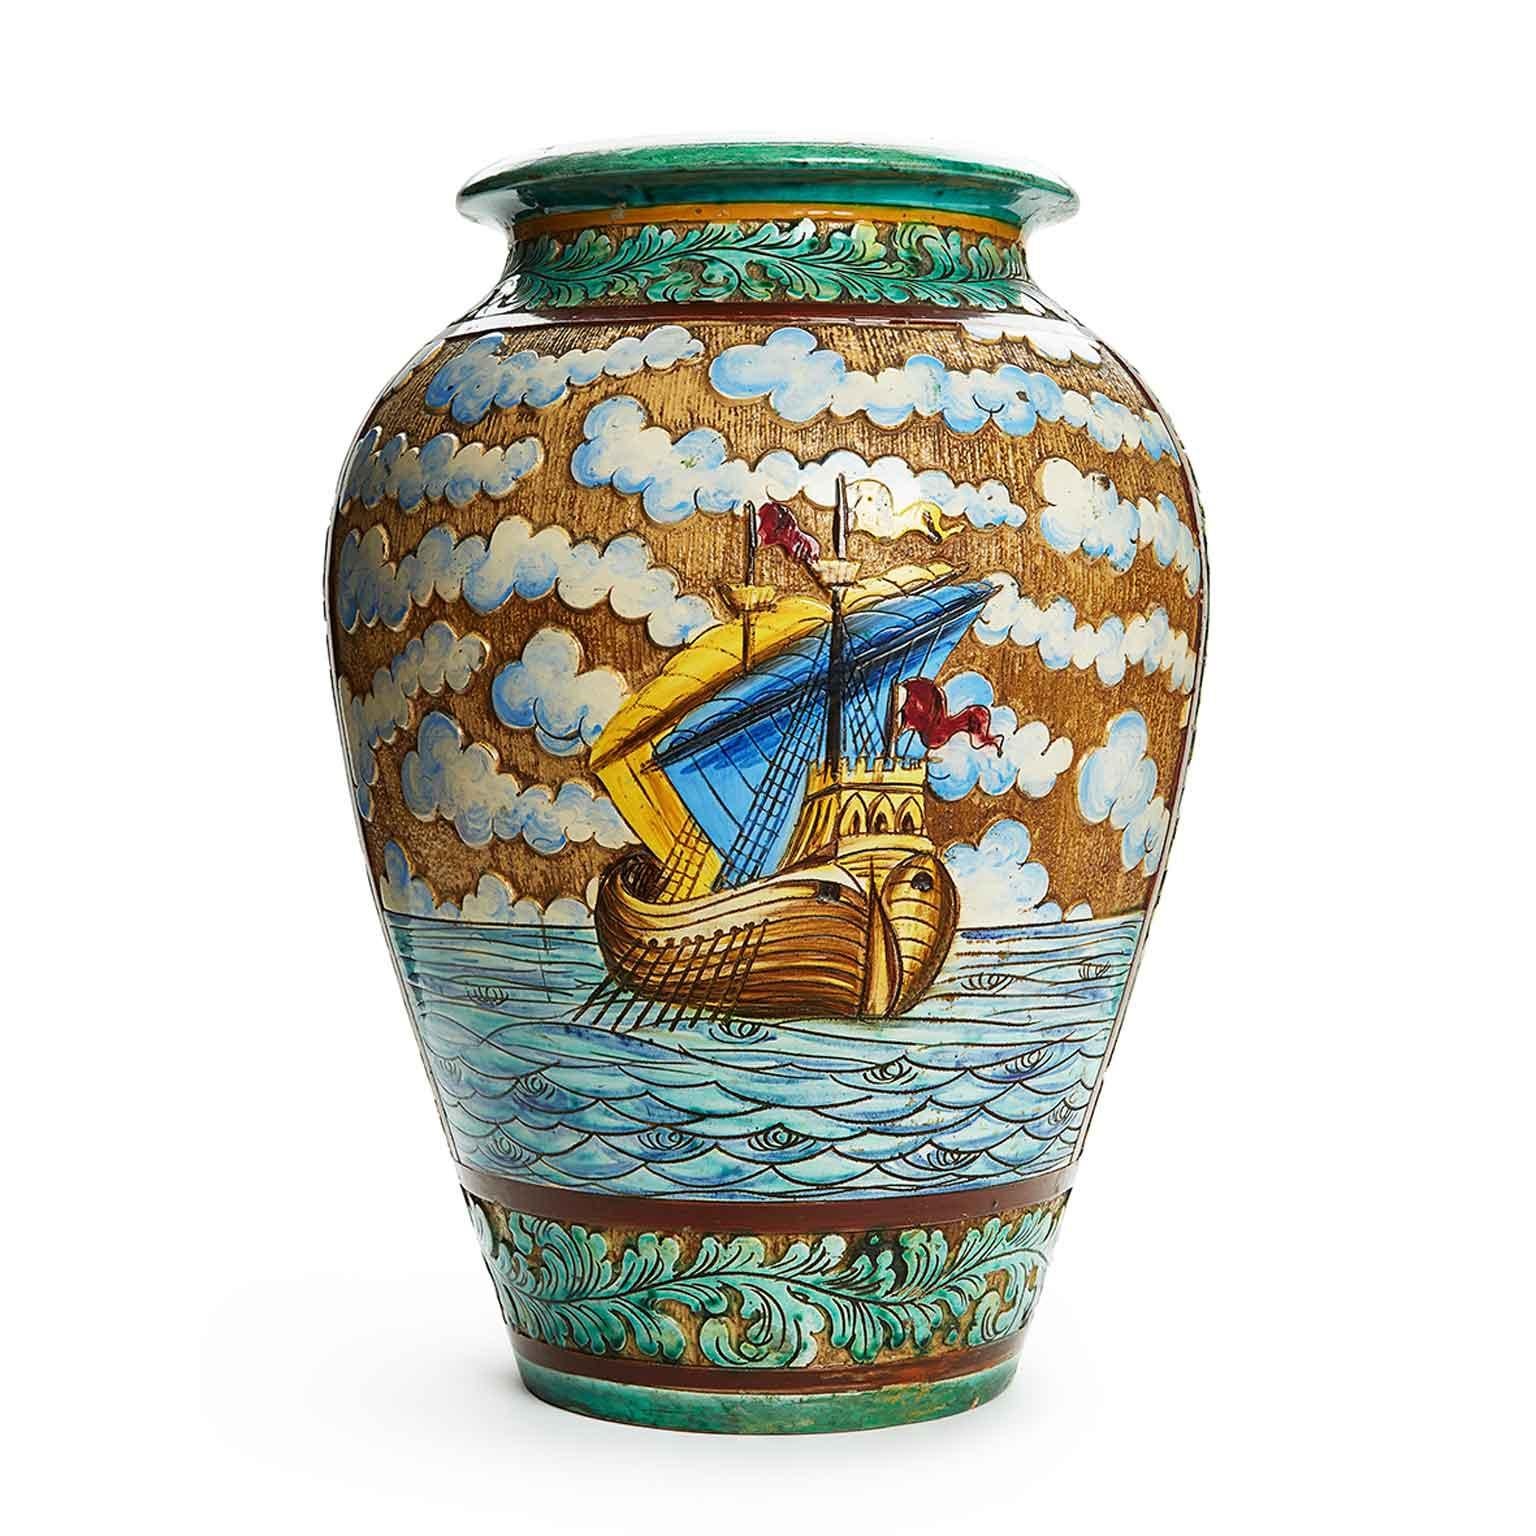 A stunning large Italian vase, suitable for flowers or umbrella stand, an Italian Ceramic artwork decorated in Relief  with a sea landscape , vessels and clouds. The vase has two turquoise floral bands, one upper and one lower with raised and